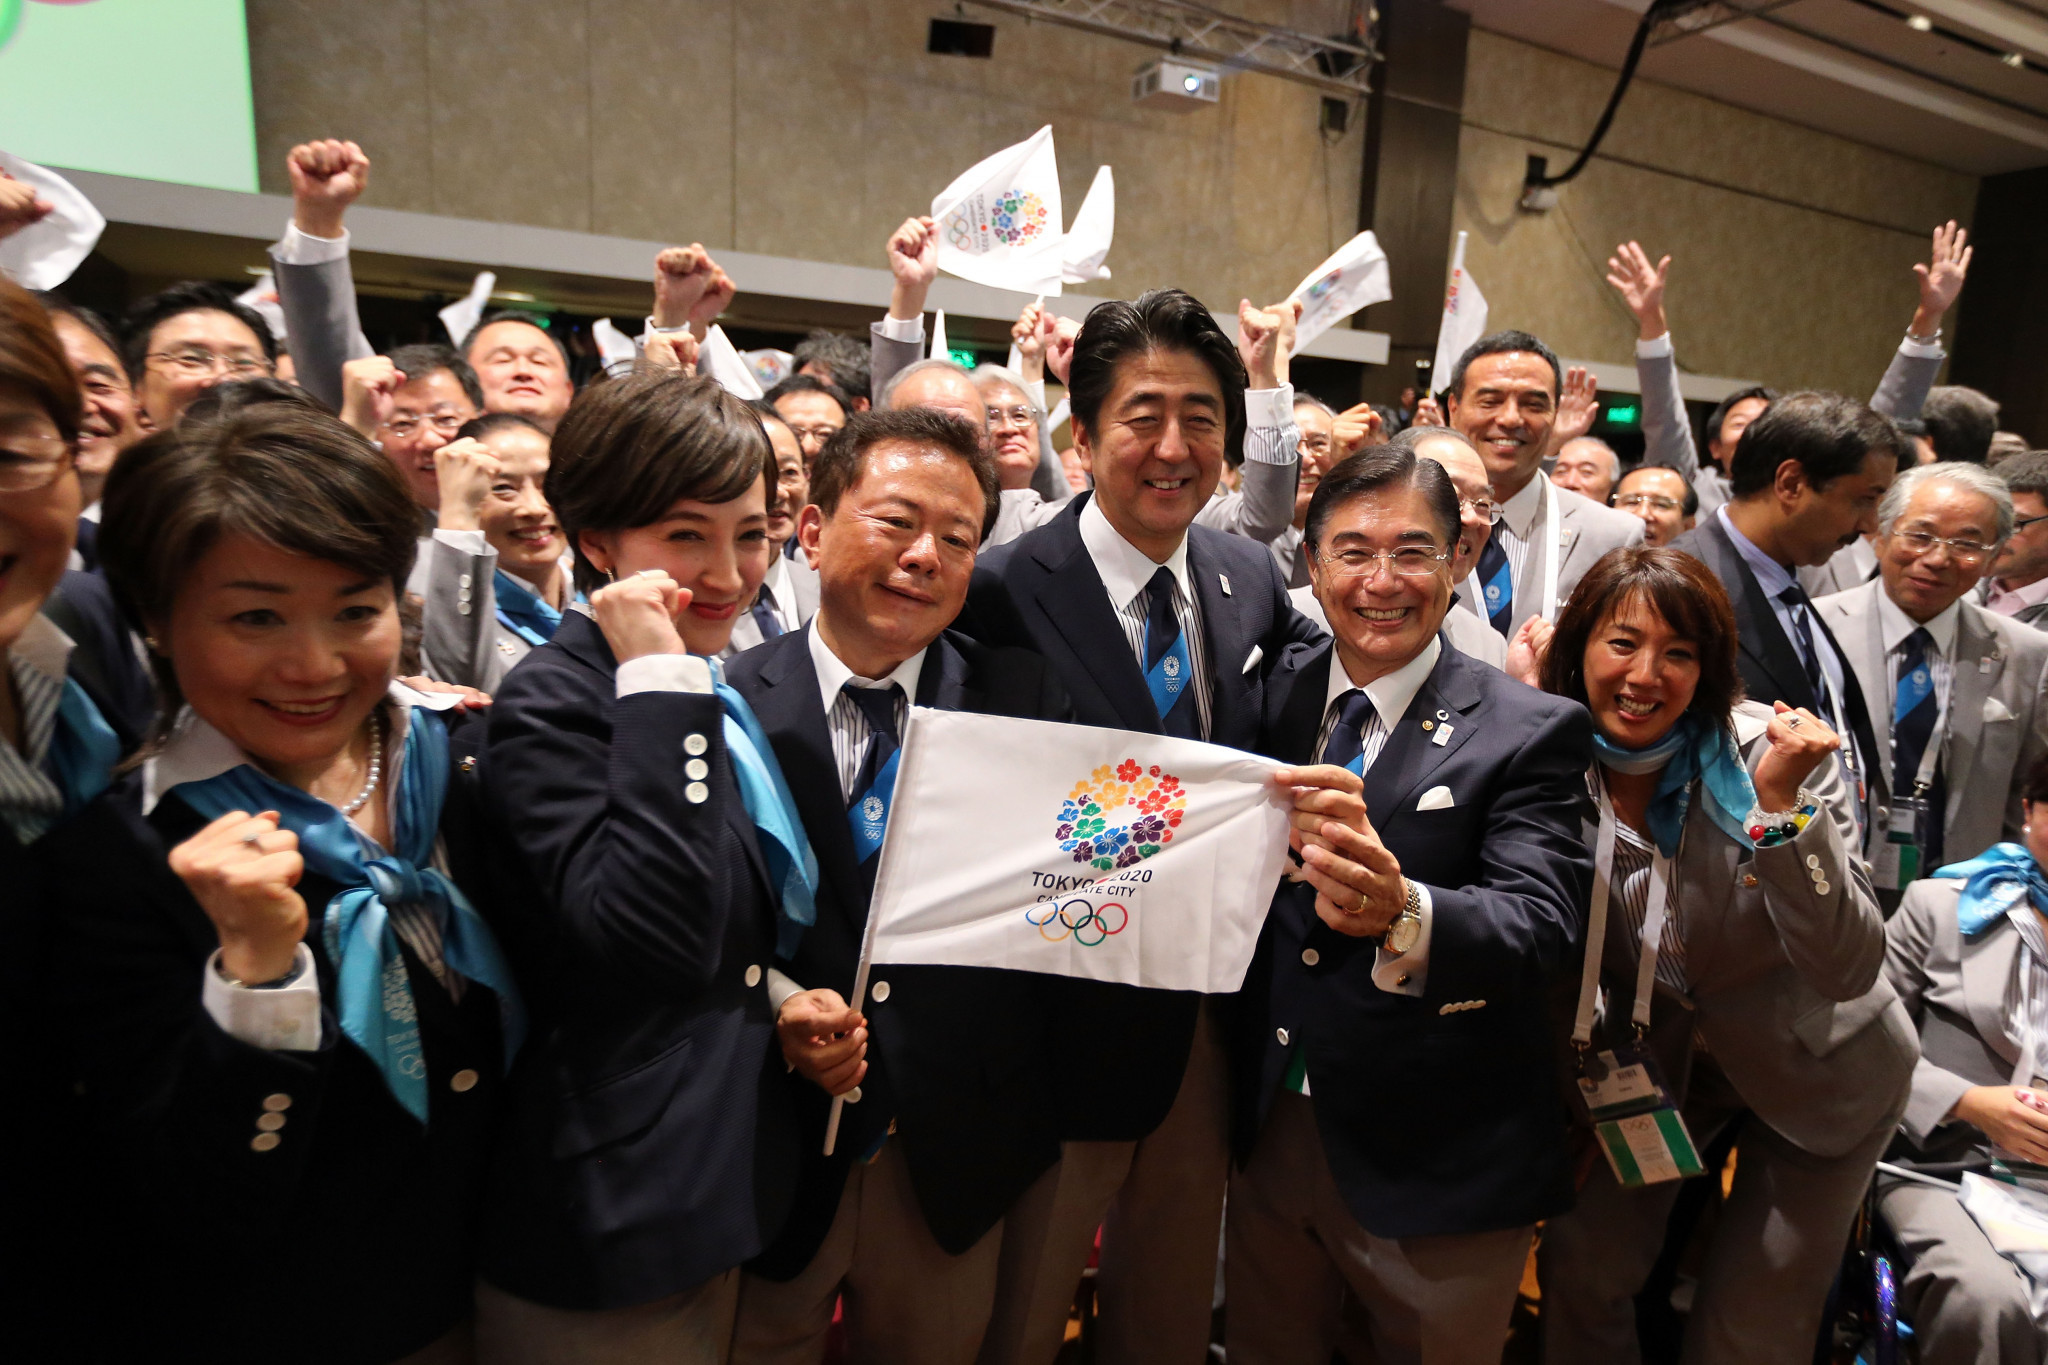 Shinzō Abe spoke in behalf of the Tokyo 2020 bid at the IOC Session in 2013 ©Getty Images